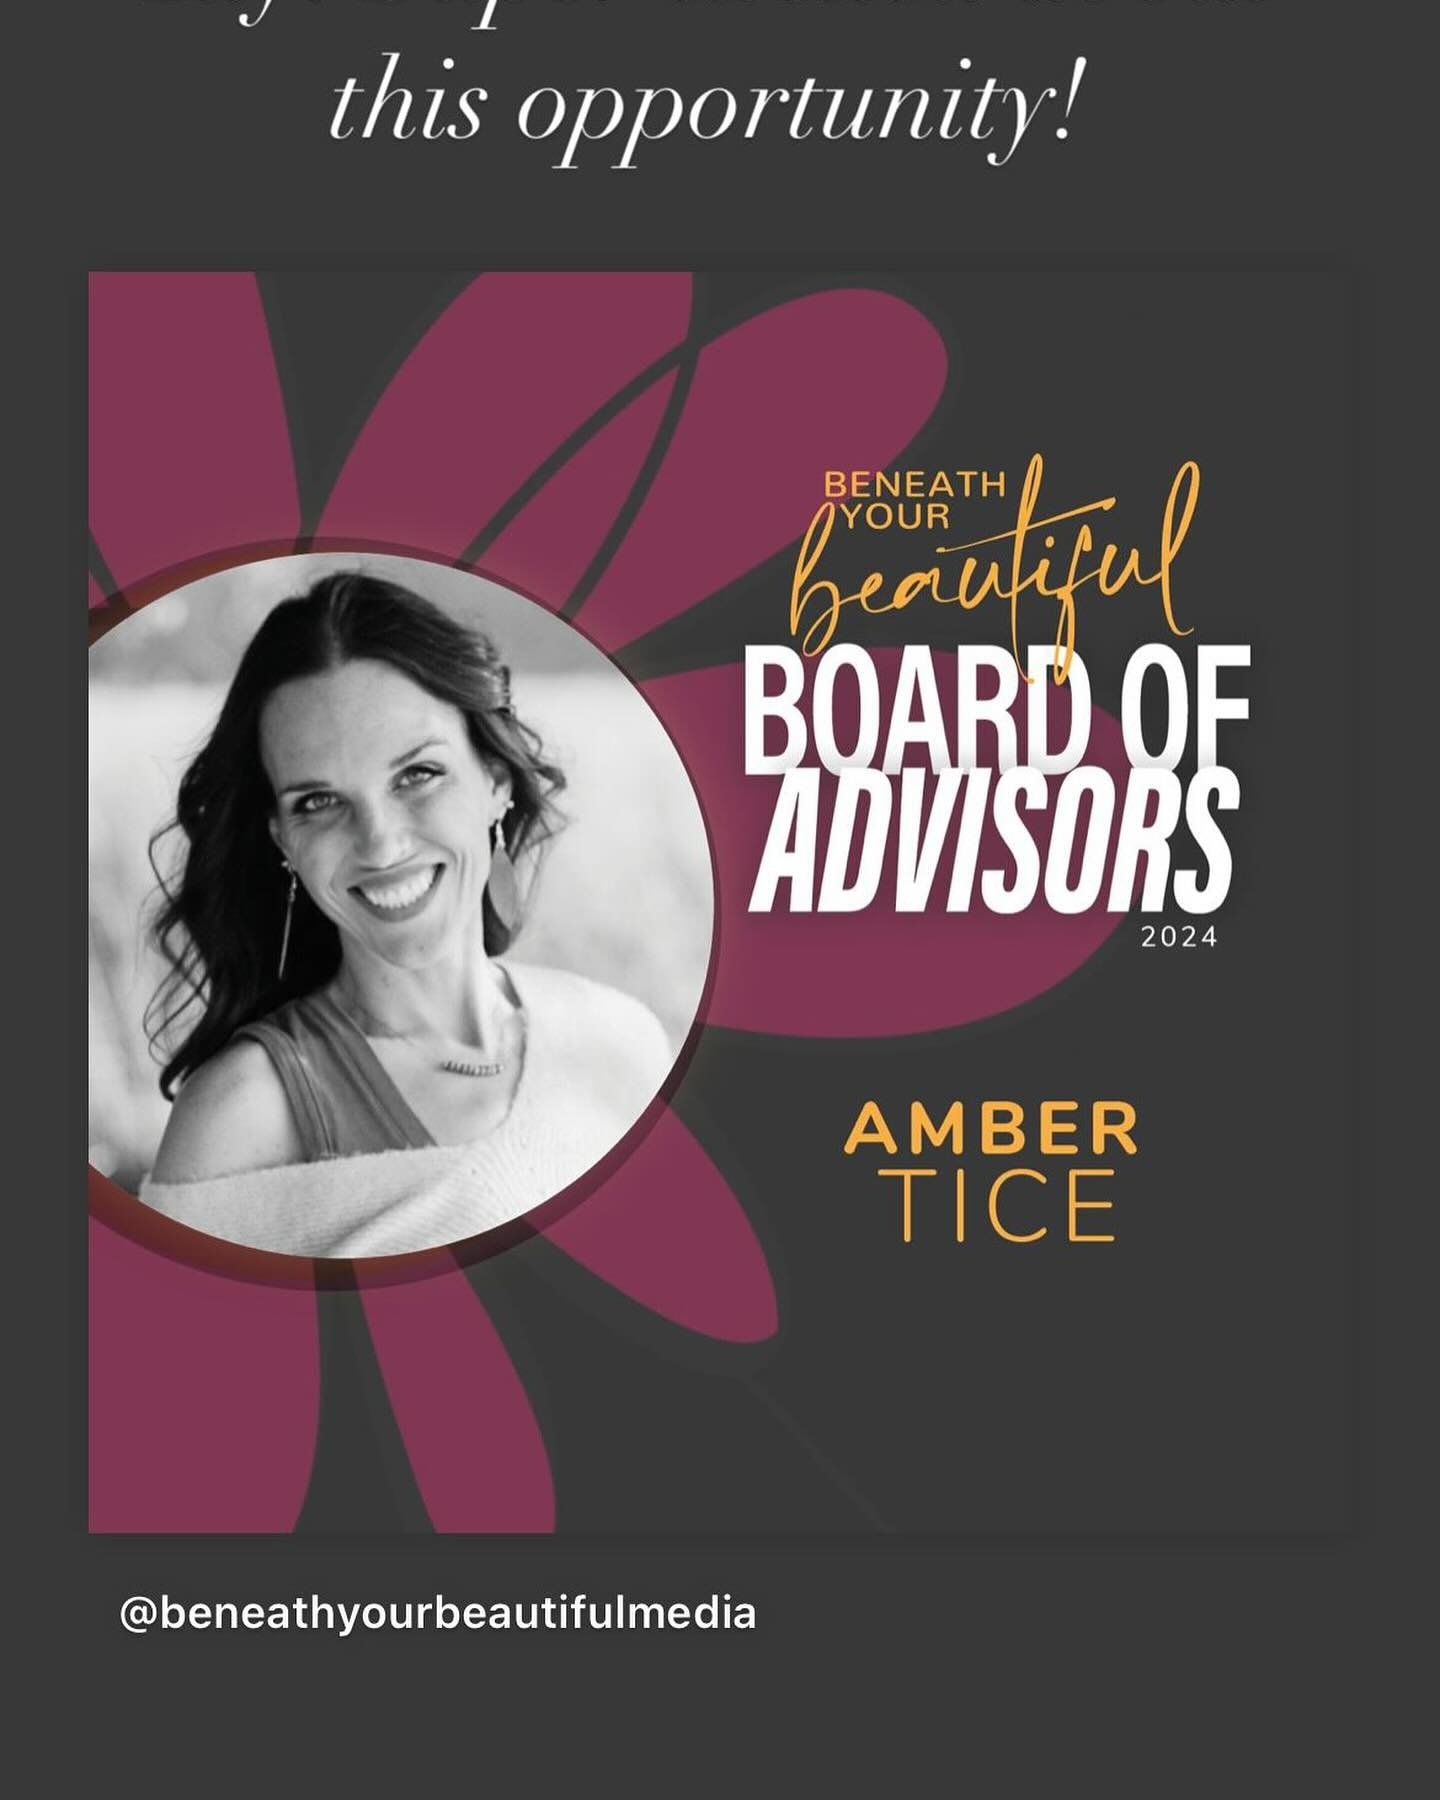 being on an advisory board as a brand new experience for me, but I&rsquo;m going to grab it by the horns and give it all I&rsquo;ve got. I want to challenge myself to get out there in the community learn more about myself and to share my insights wit